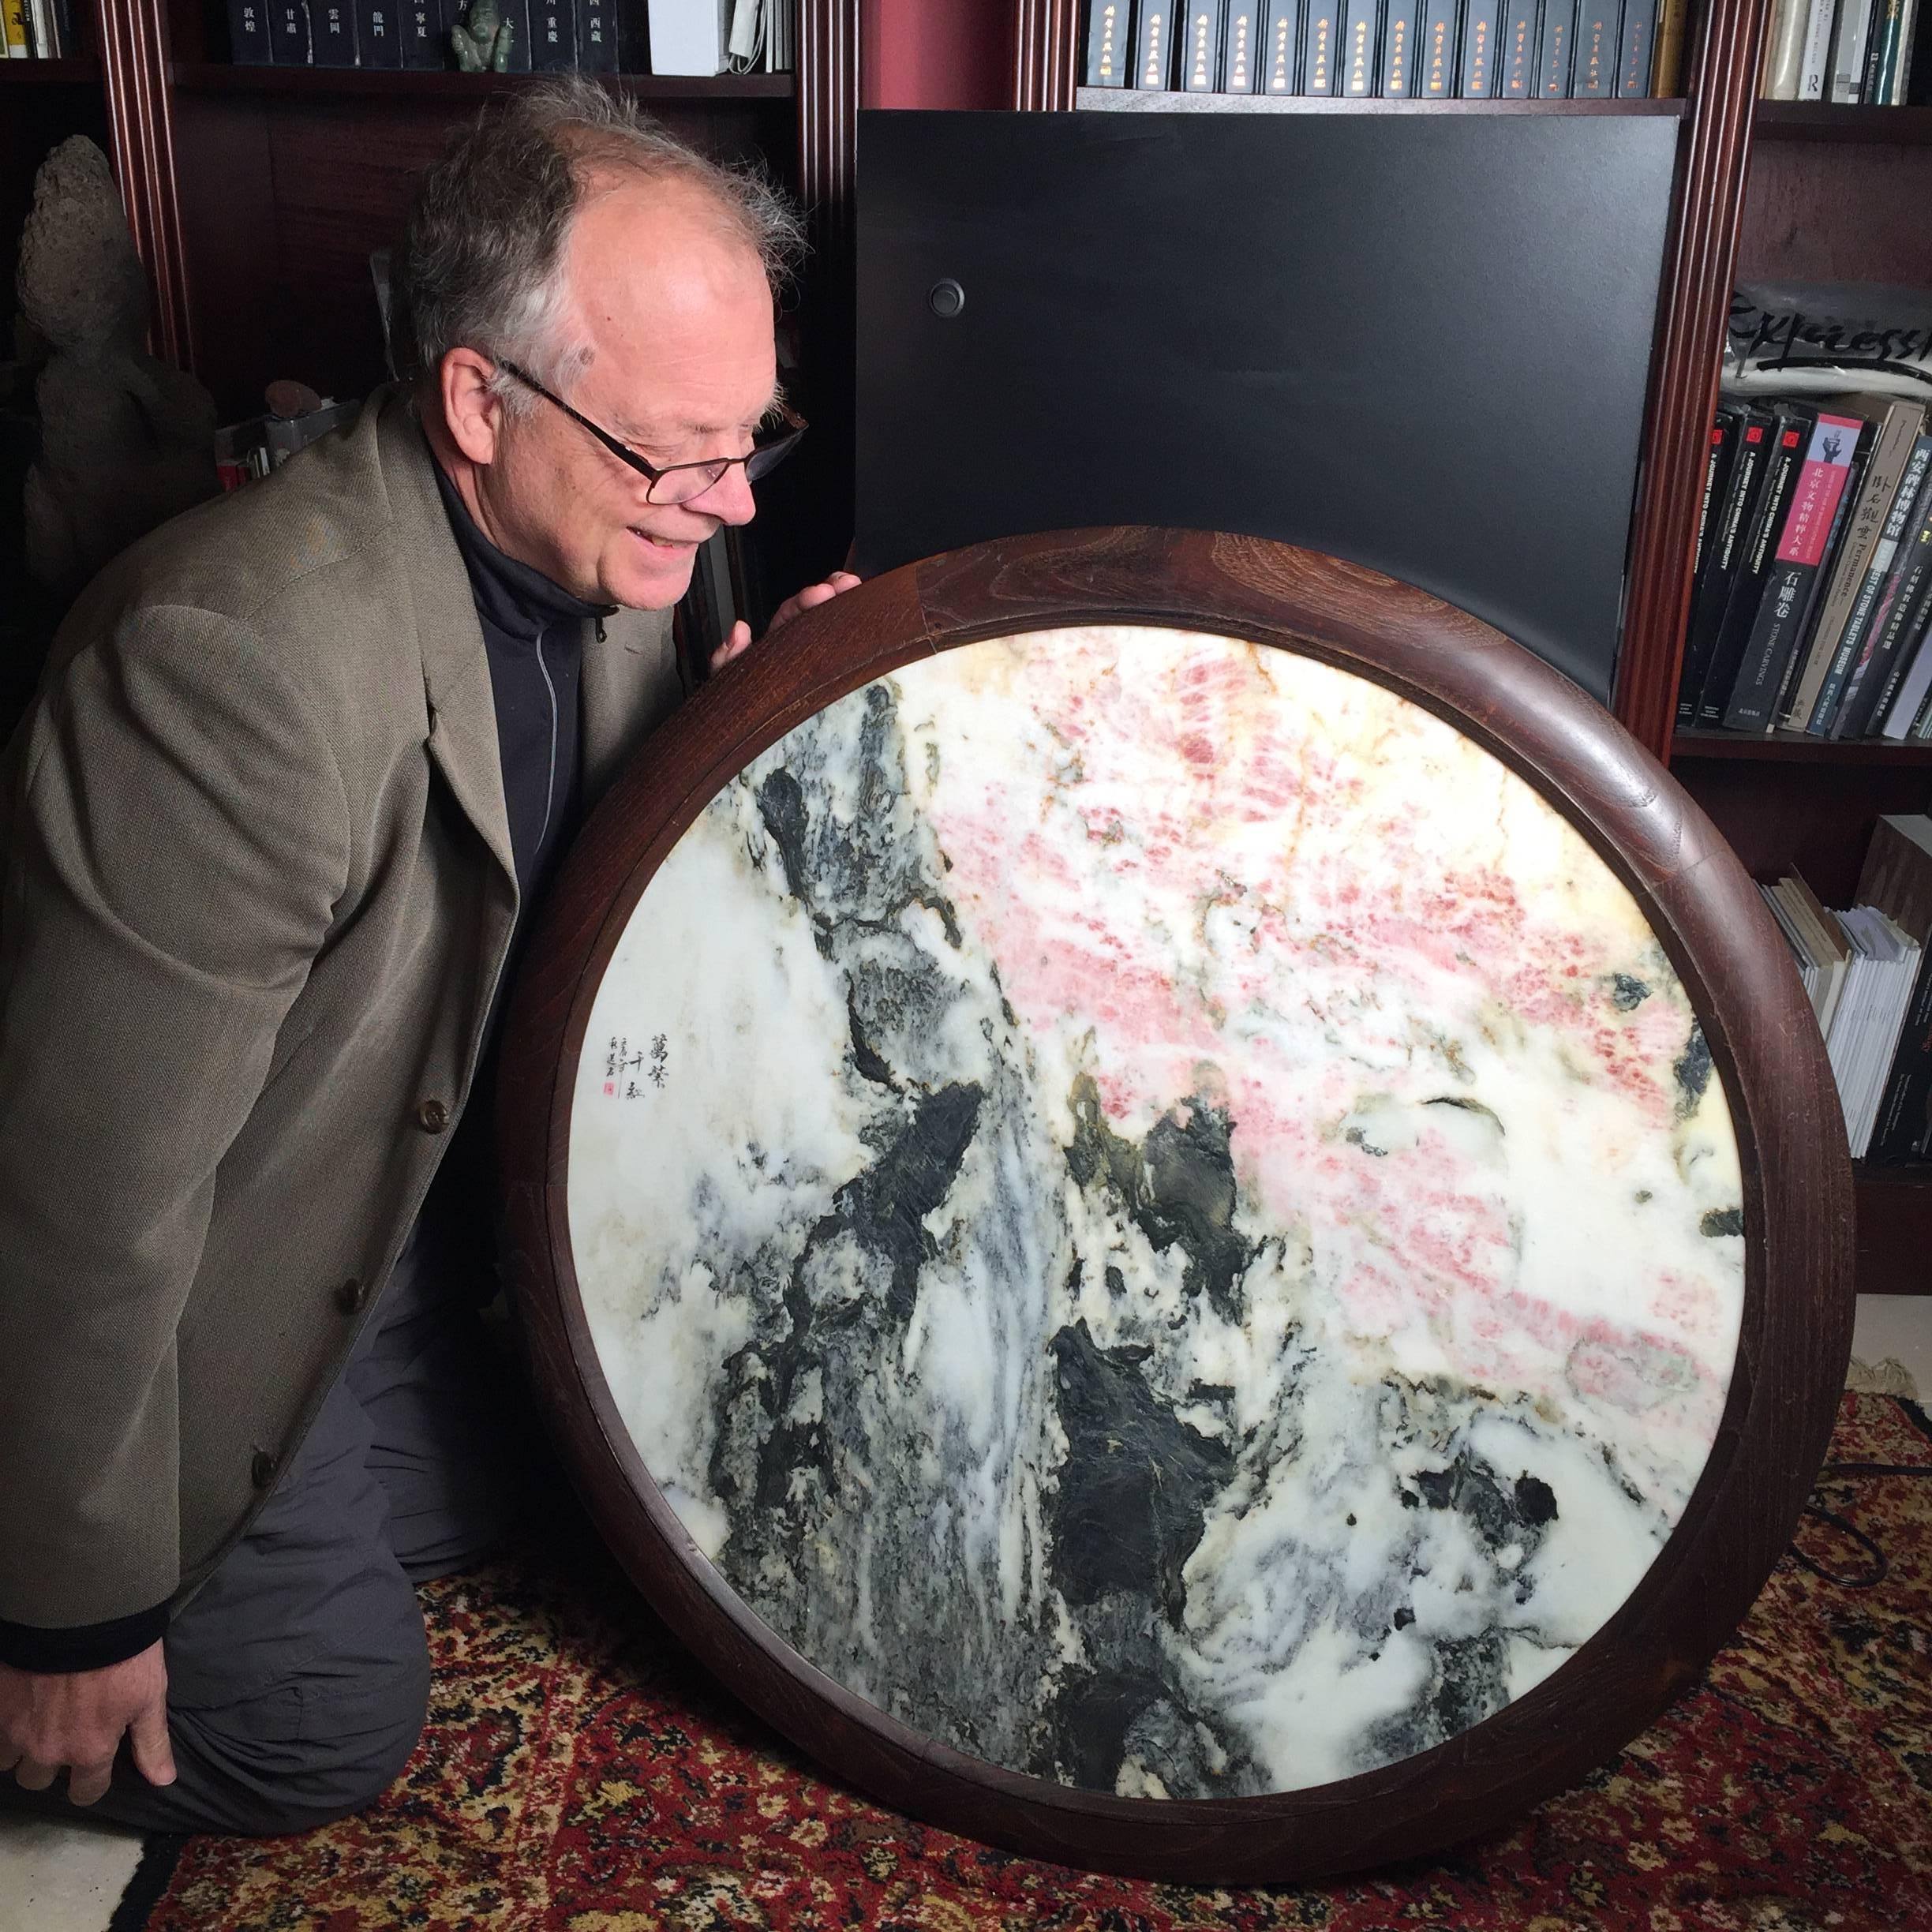 This Chinese large round and extraordinary natural stone painting - a masterwork-  in large scale moon gate form features mountains, pink and white clouds, and abstract images of two friends meeting in the center.  

Indeed the artistic calligraphy